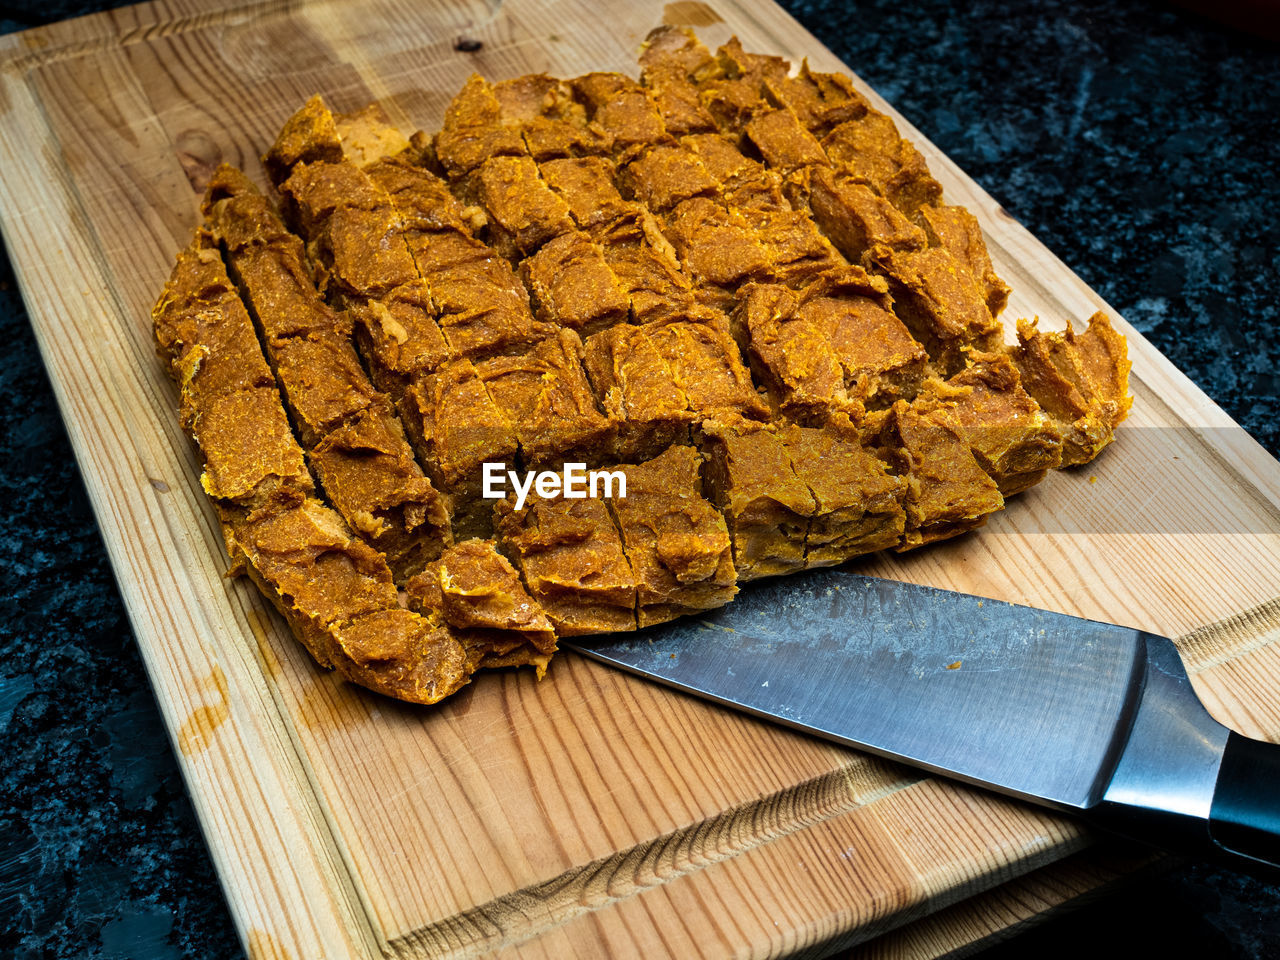 Home made dog treats made of pumpkin on a wooden cutting block with a knife.